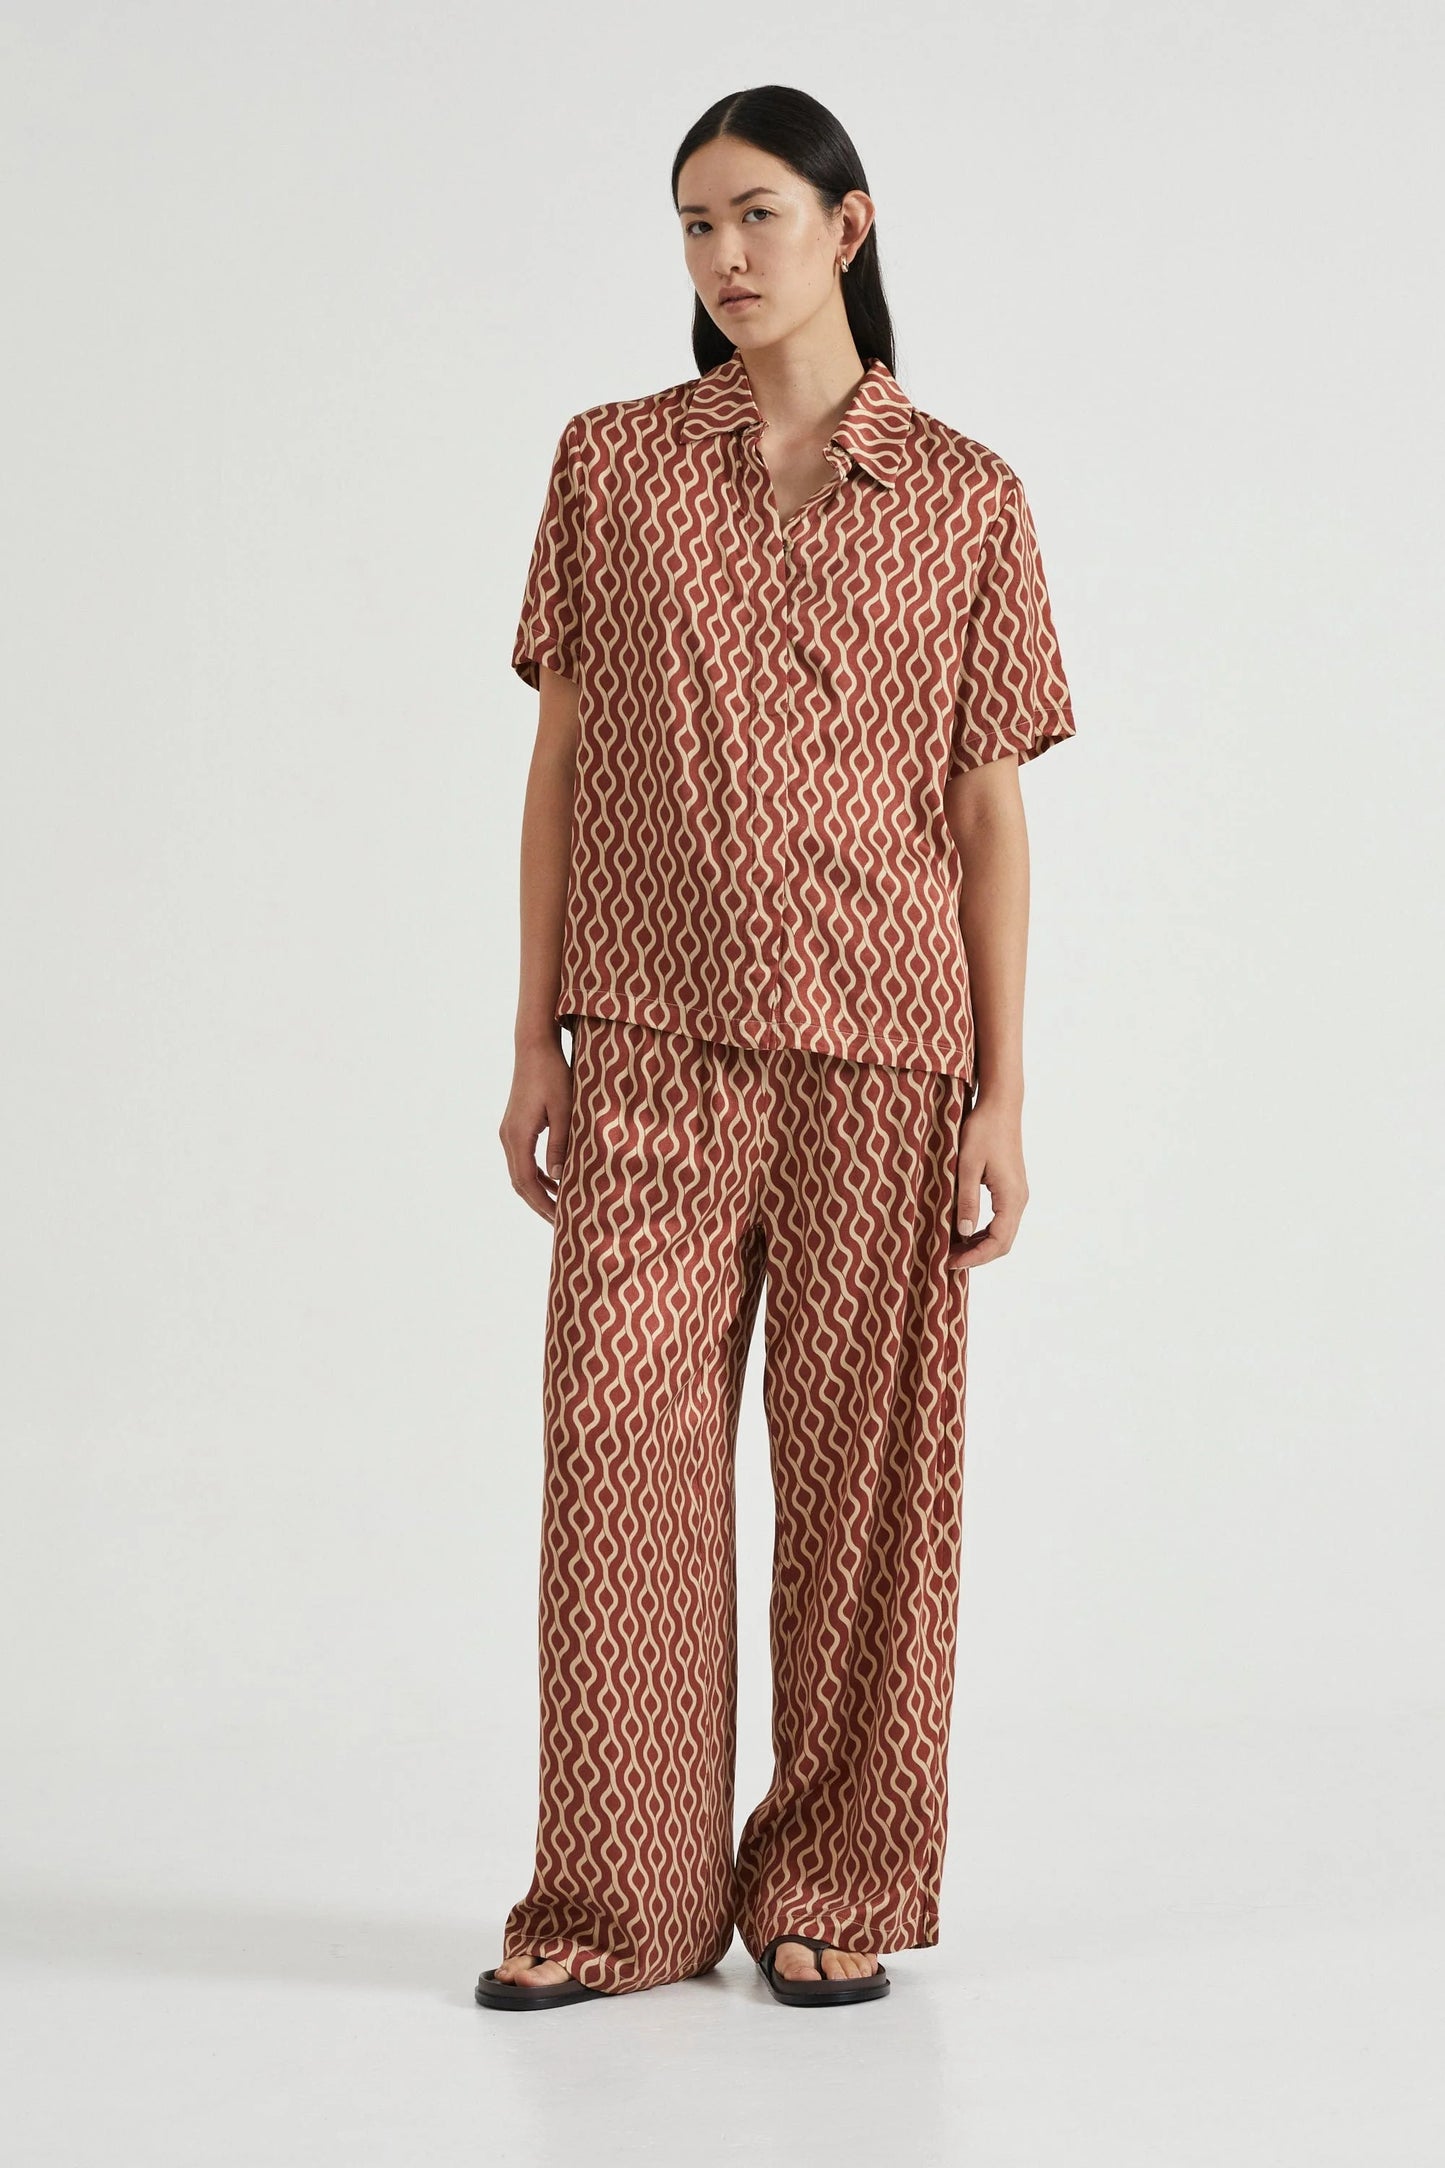 Third Form Voyage relaxed Shirt Tile